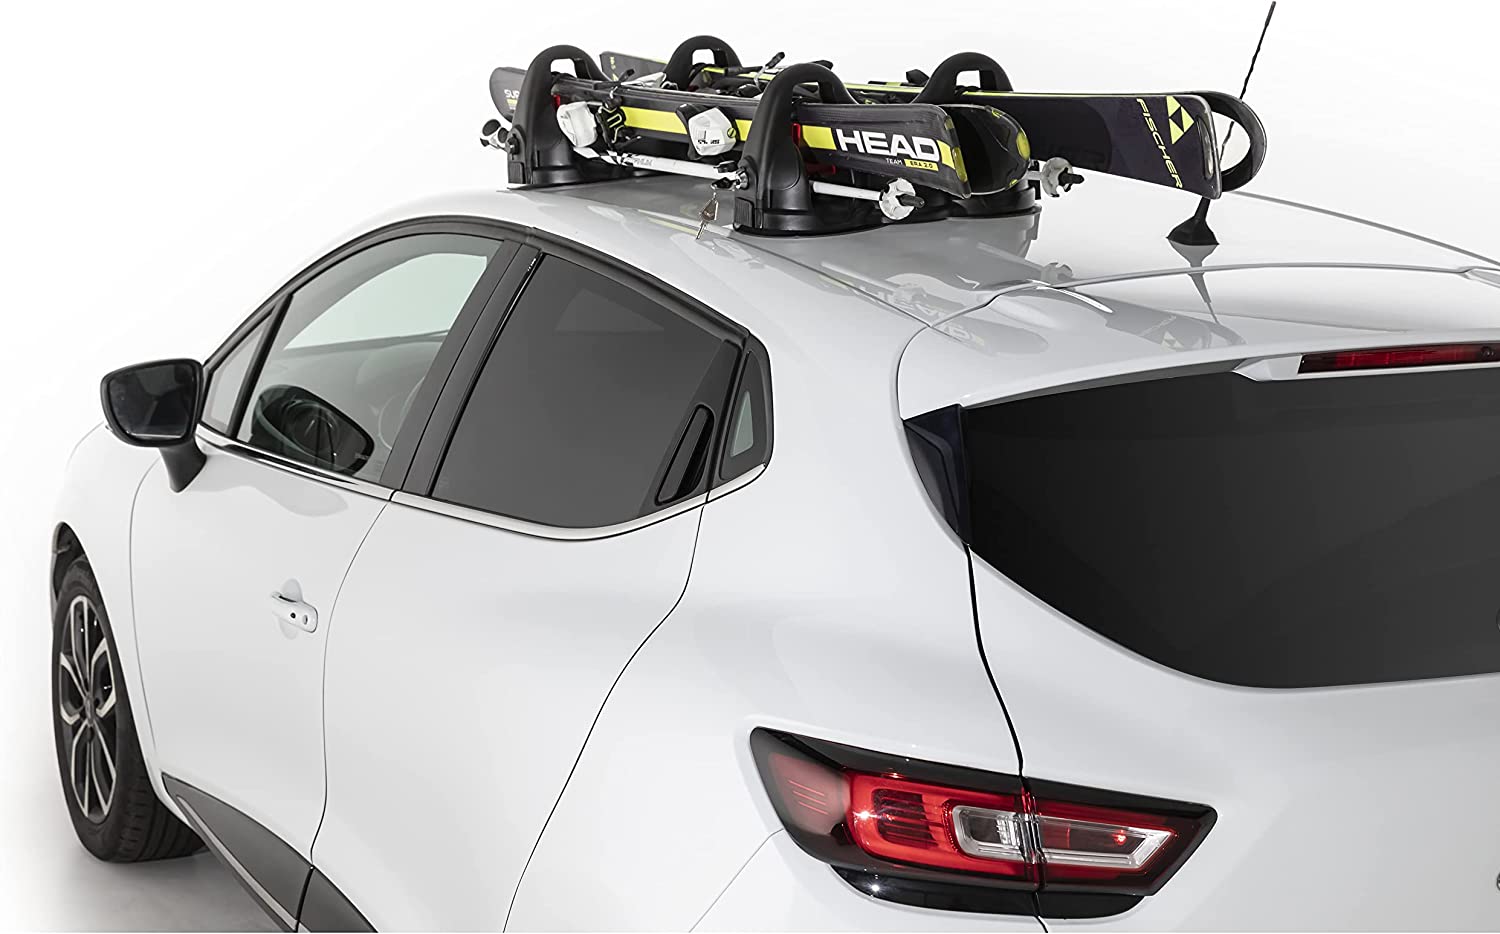 MENABO - Himalaya magnetic ski rack for 2 pairs of skis and 4 poles with anti-theft device